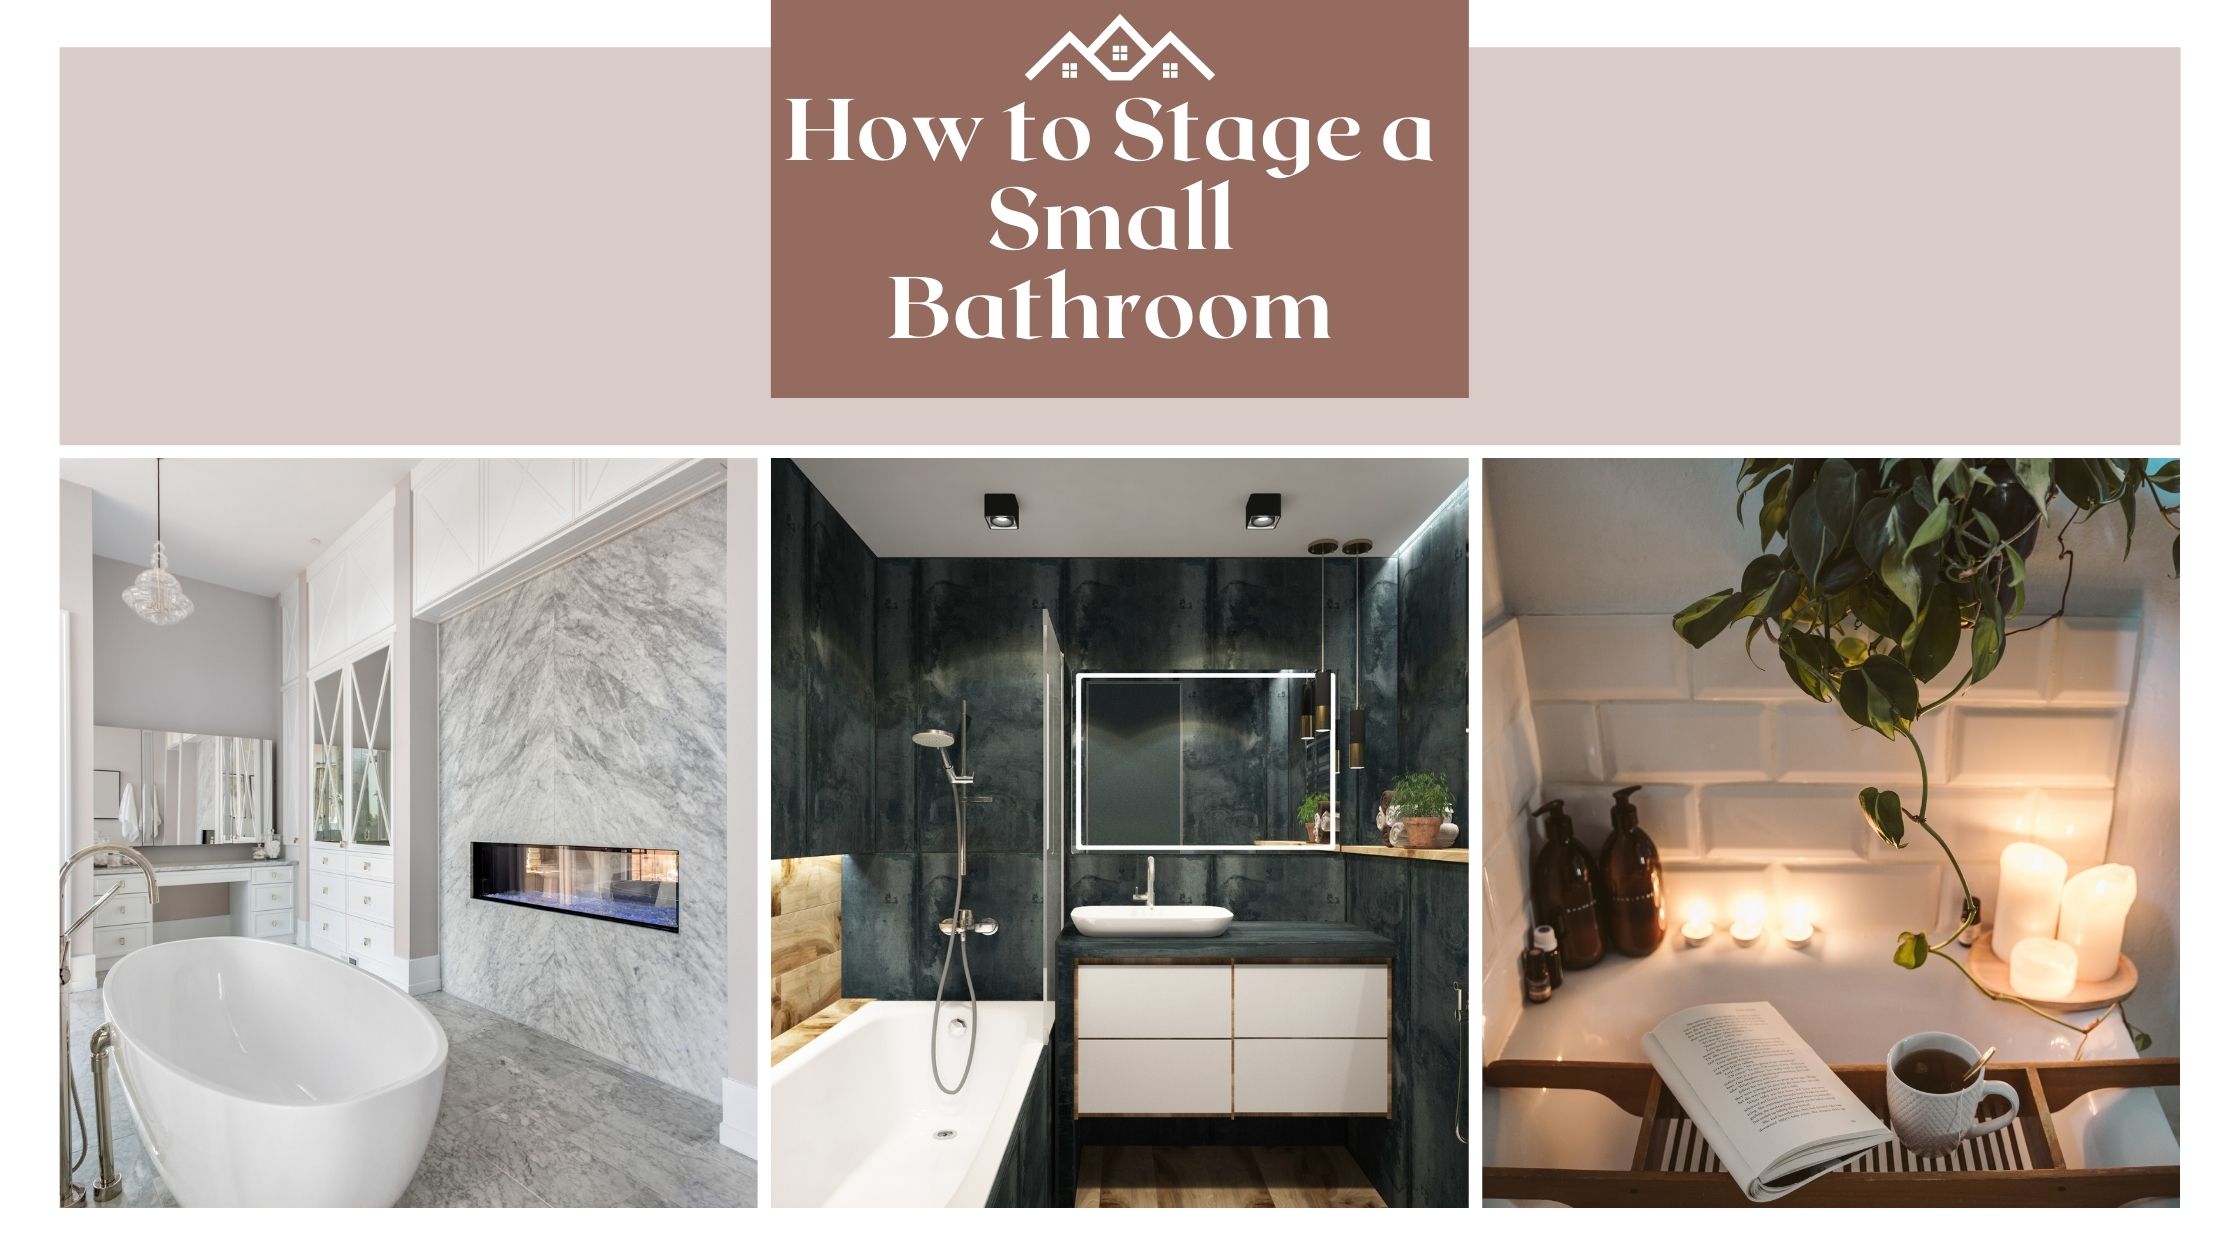 How to Stage a Small Bathroom